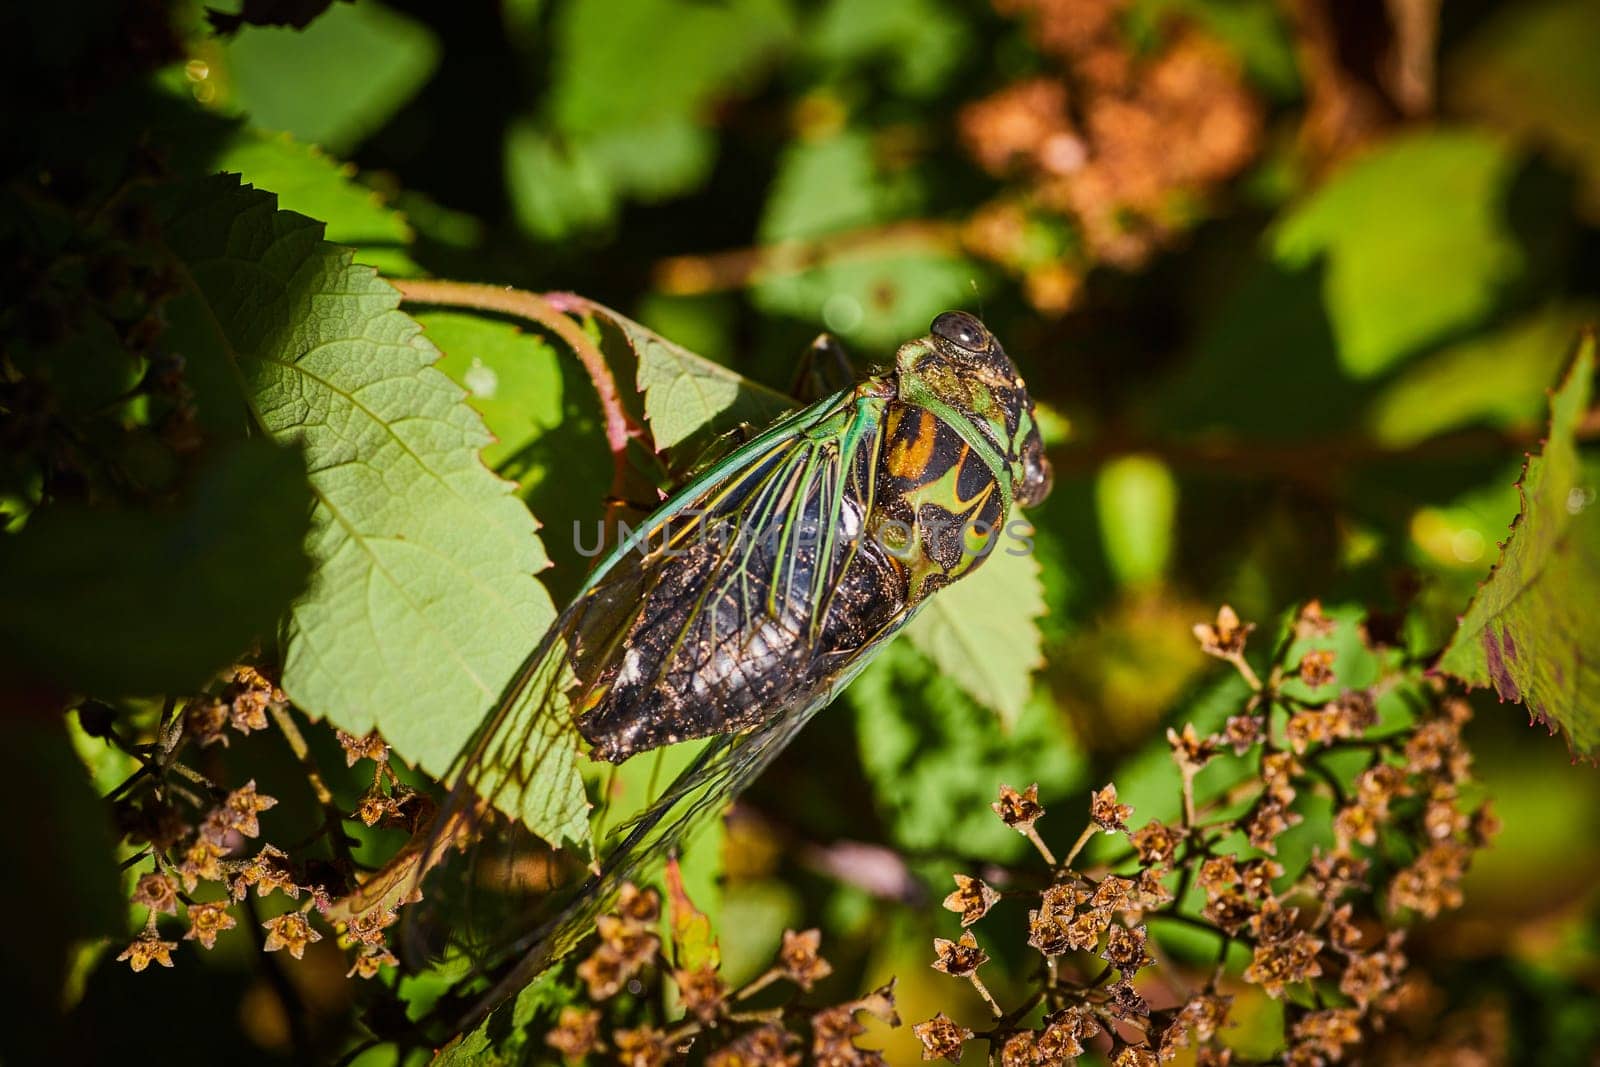 Cicada on Leaf in Natural Light, Side View Perspective by njproductions